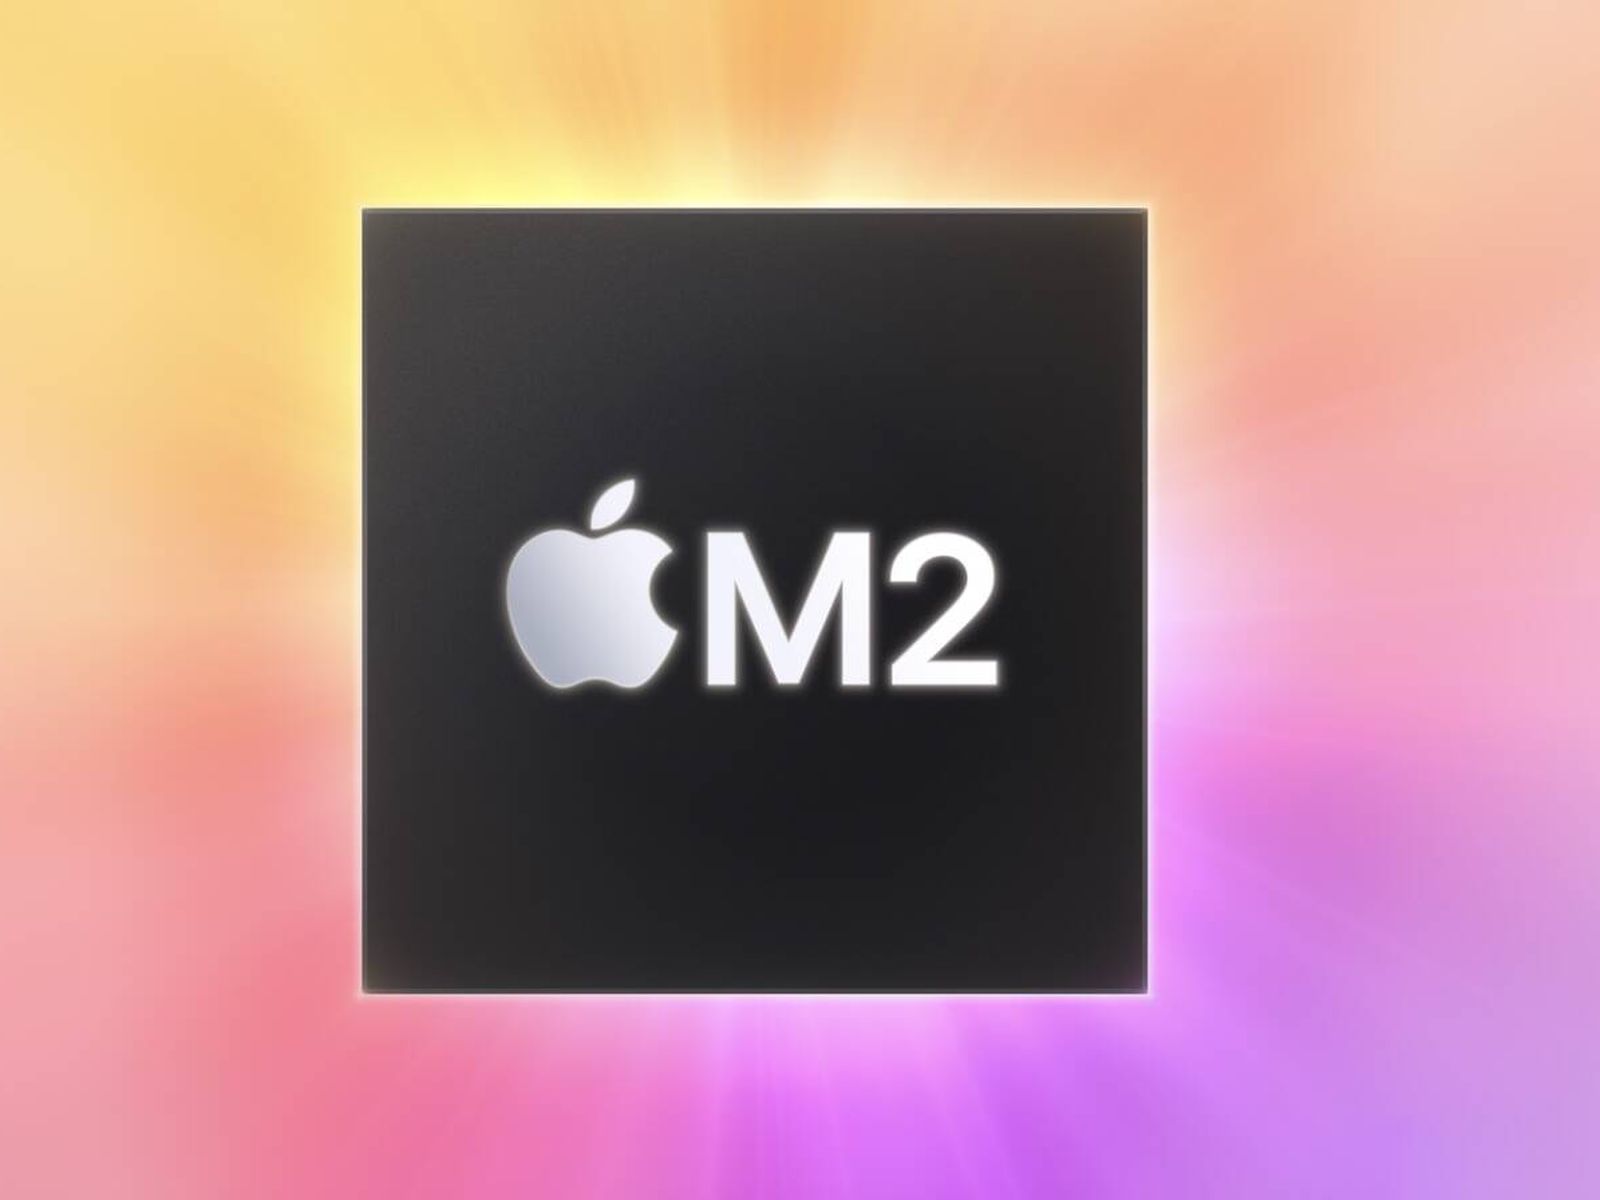 Apple M1 Chip: Everything You Need to Know - MacRumors